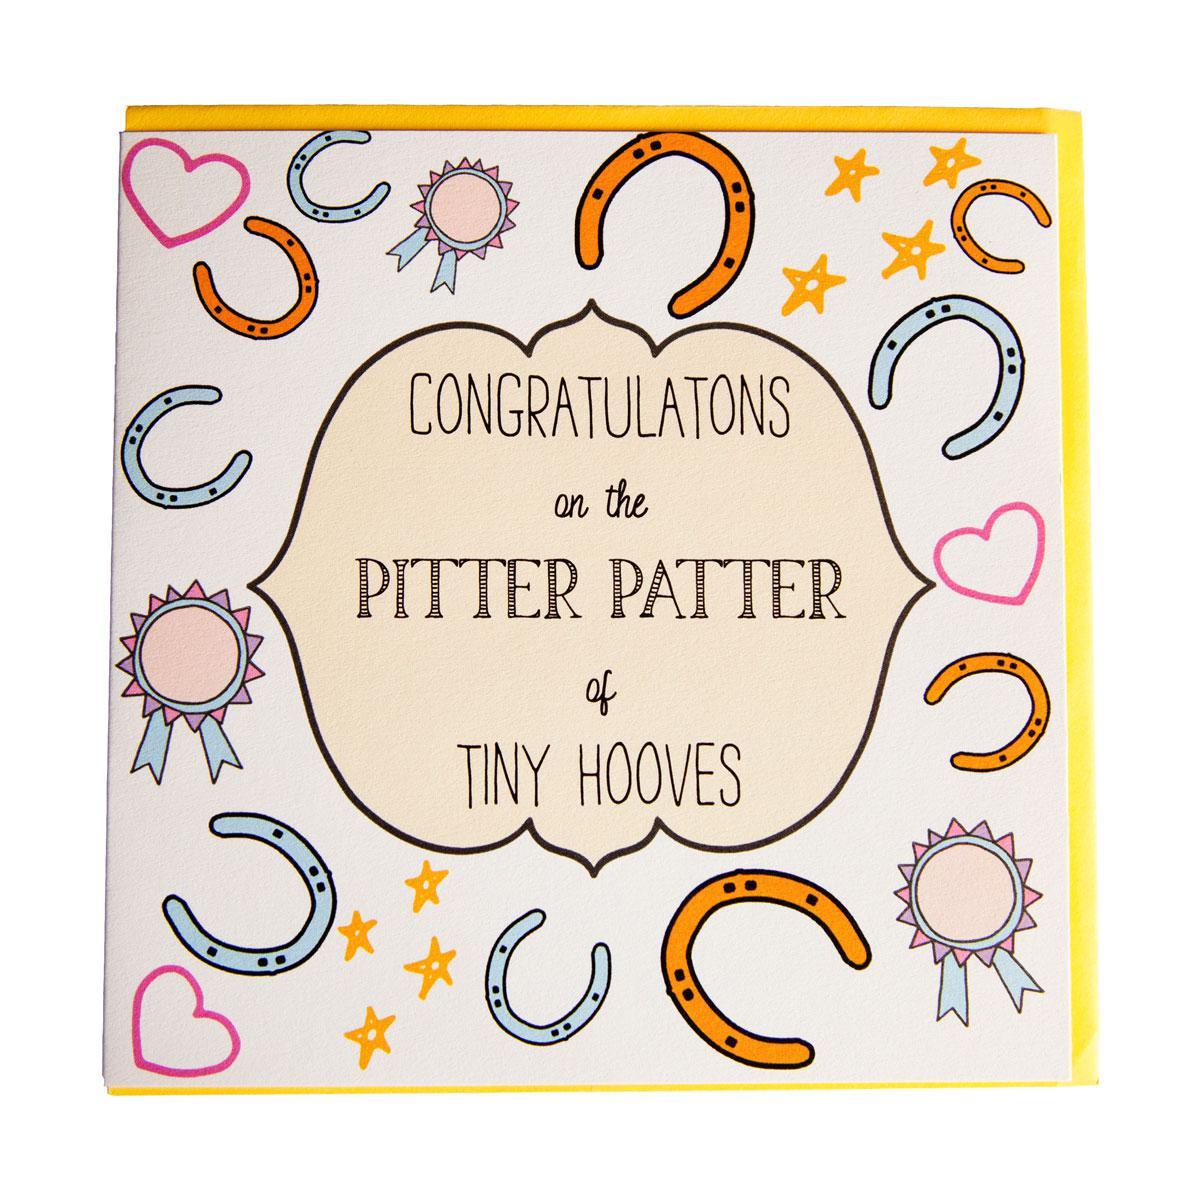 Gubblecote Pitter Patter Hooves Congratulations Card (Multicoloured) (One Size)